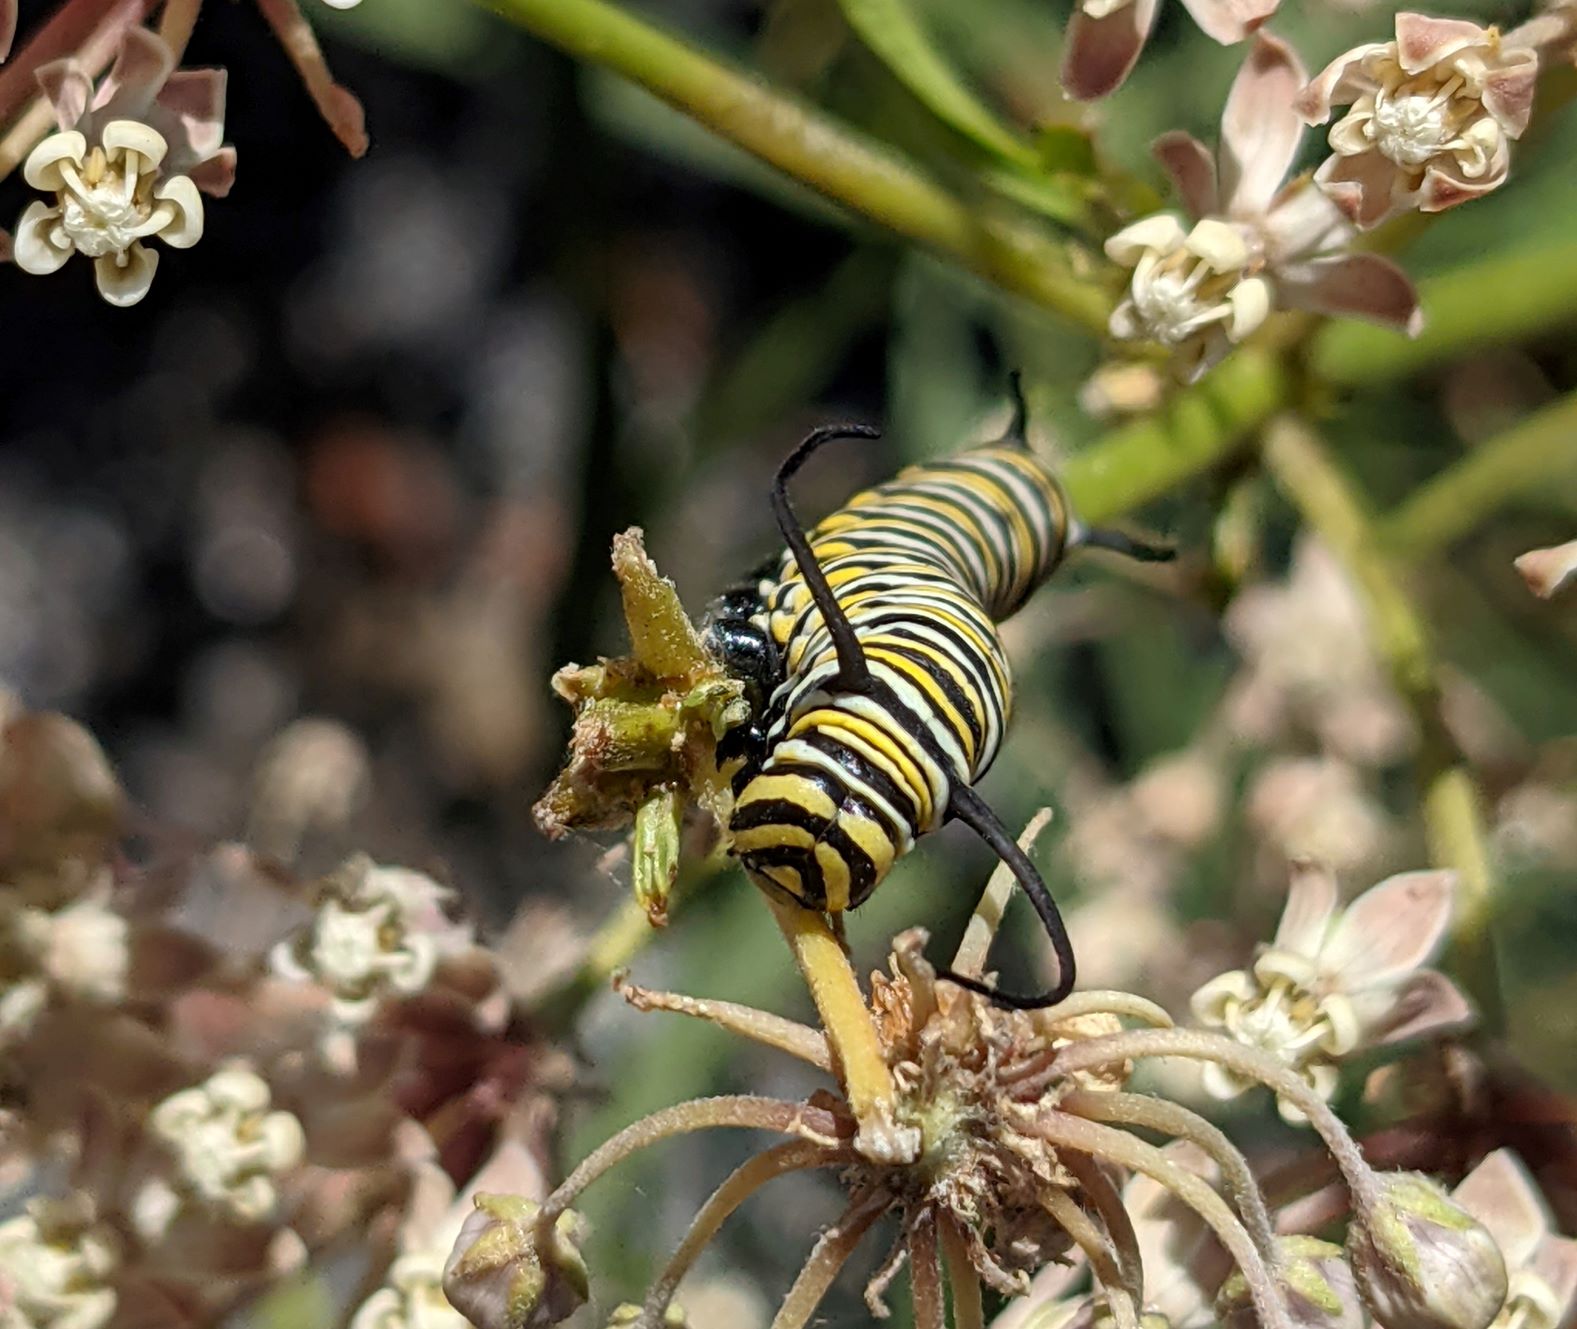 Black, white, and yellow striped caterpillar in the center of the photo is eating native milkweed, bunches of light pink milkweed flowers surround it.